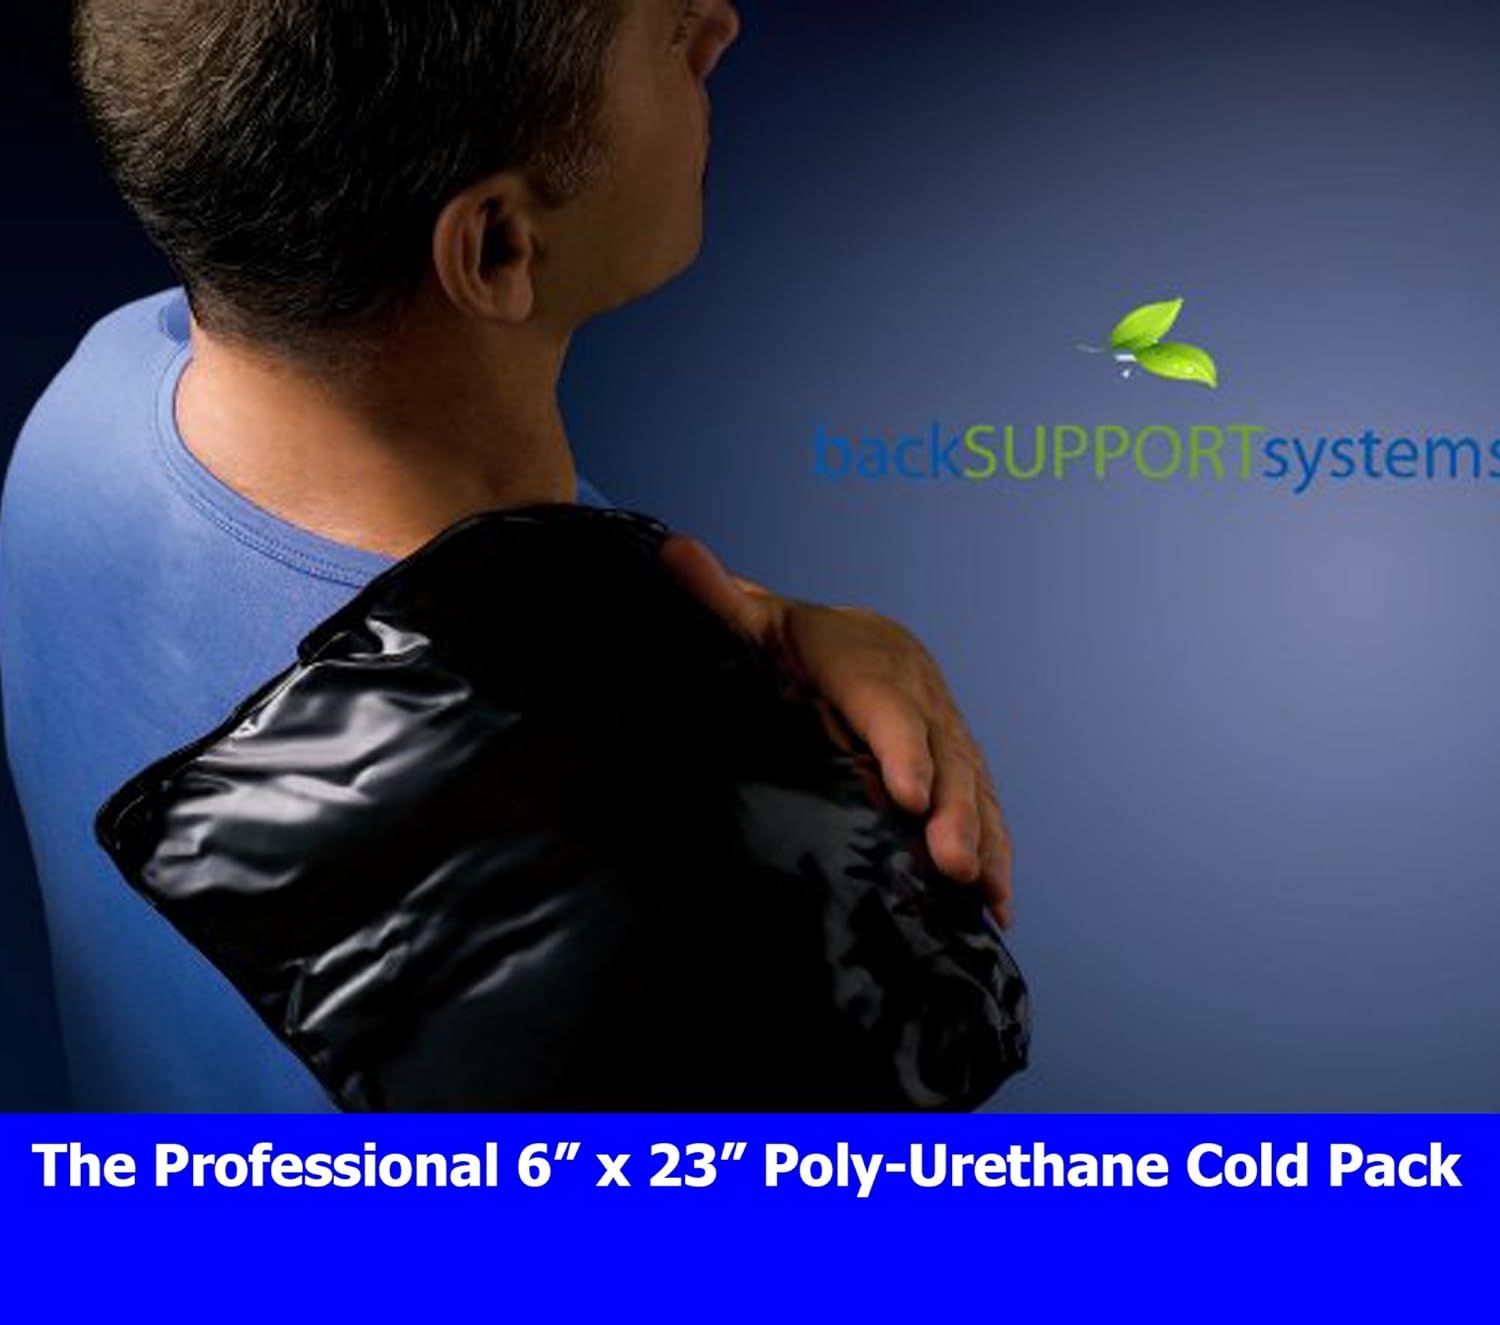 Back Support Systems Professional Cold Pack - Professional Medical Grade for All Injuries (6"x 23" Hot & Cold Pack)